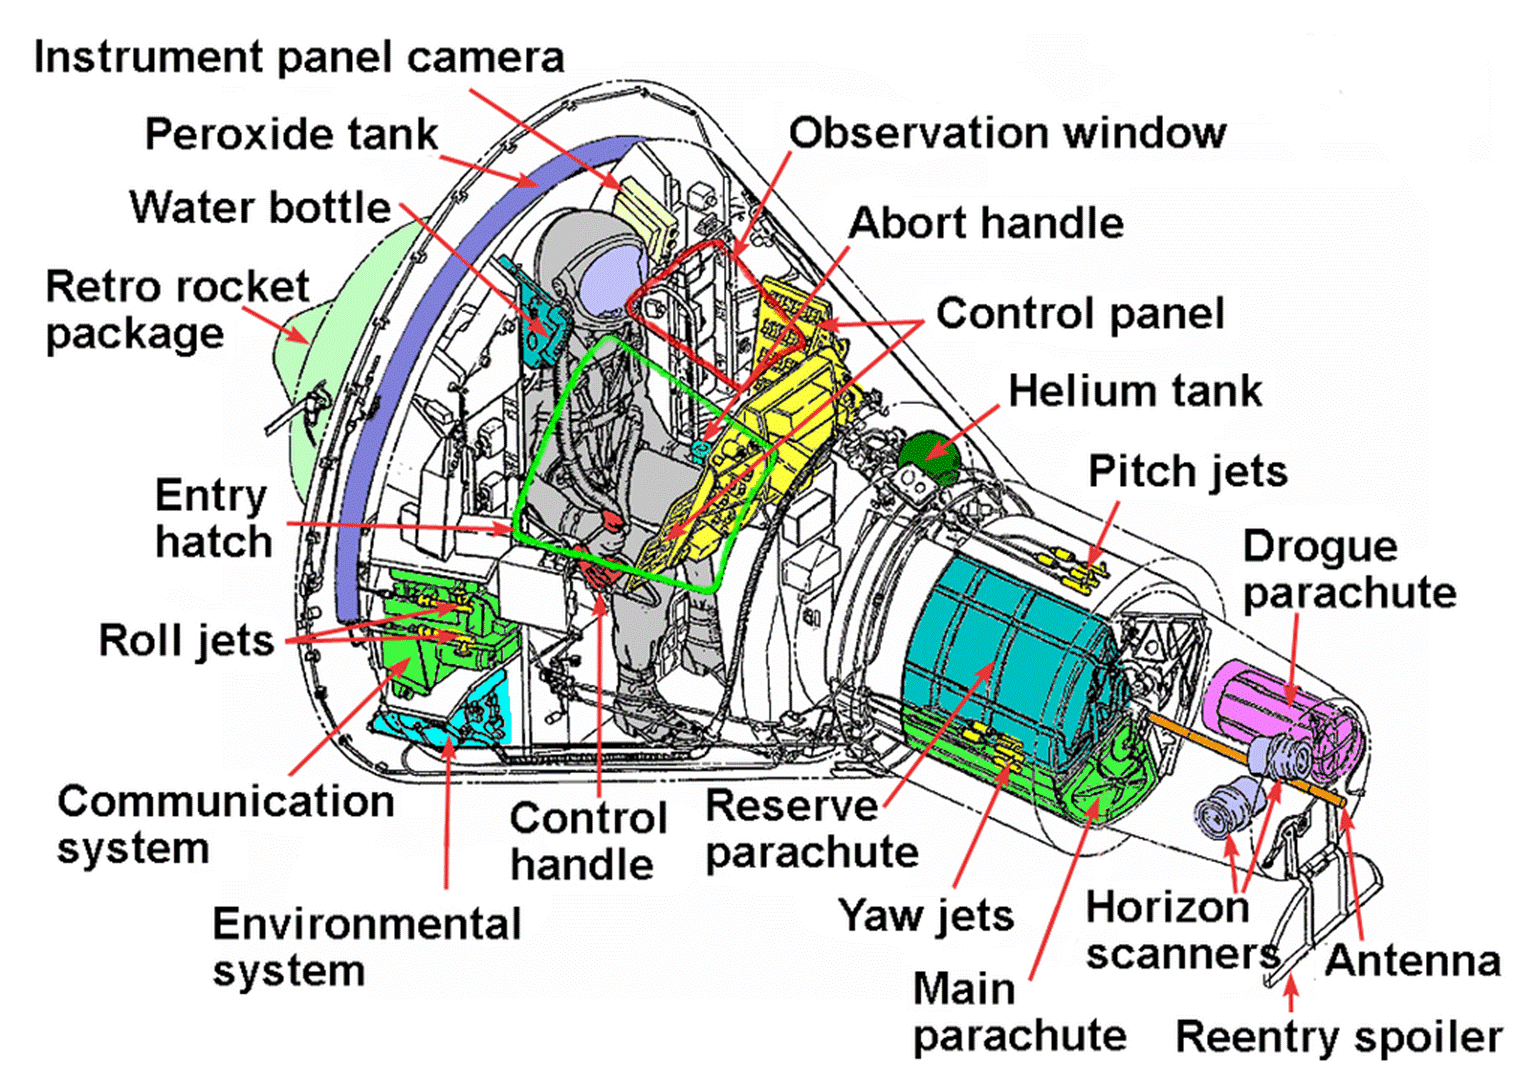 https://upload.wikimedia.org/wikipedia/commons/thumb/3/3f/Mercury_Spacecraft.png/1024px-Mercury_Spacecraft.png